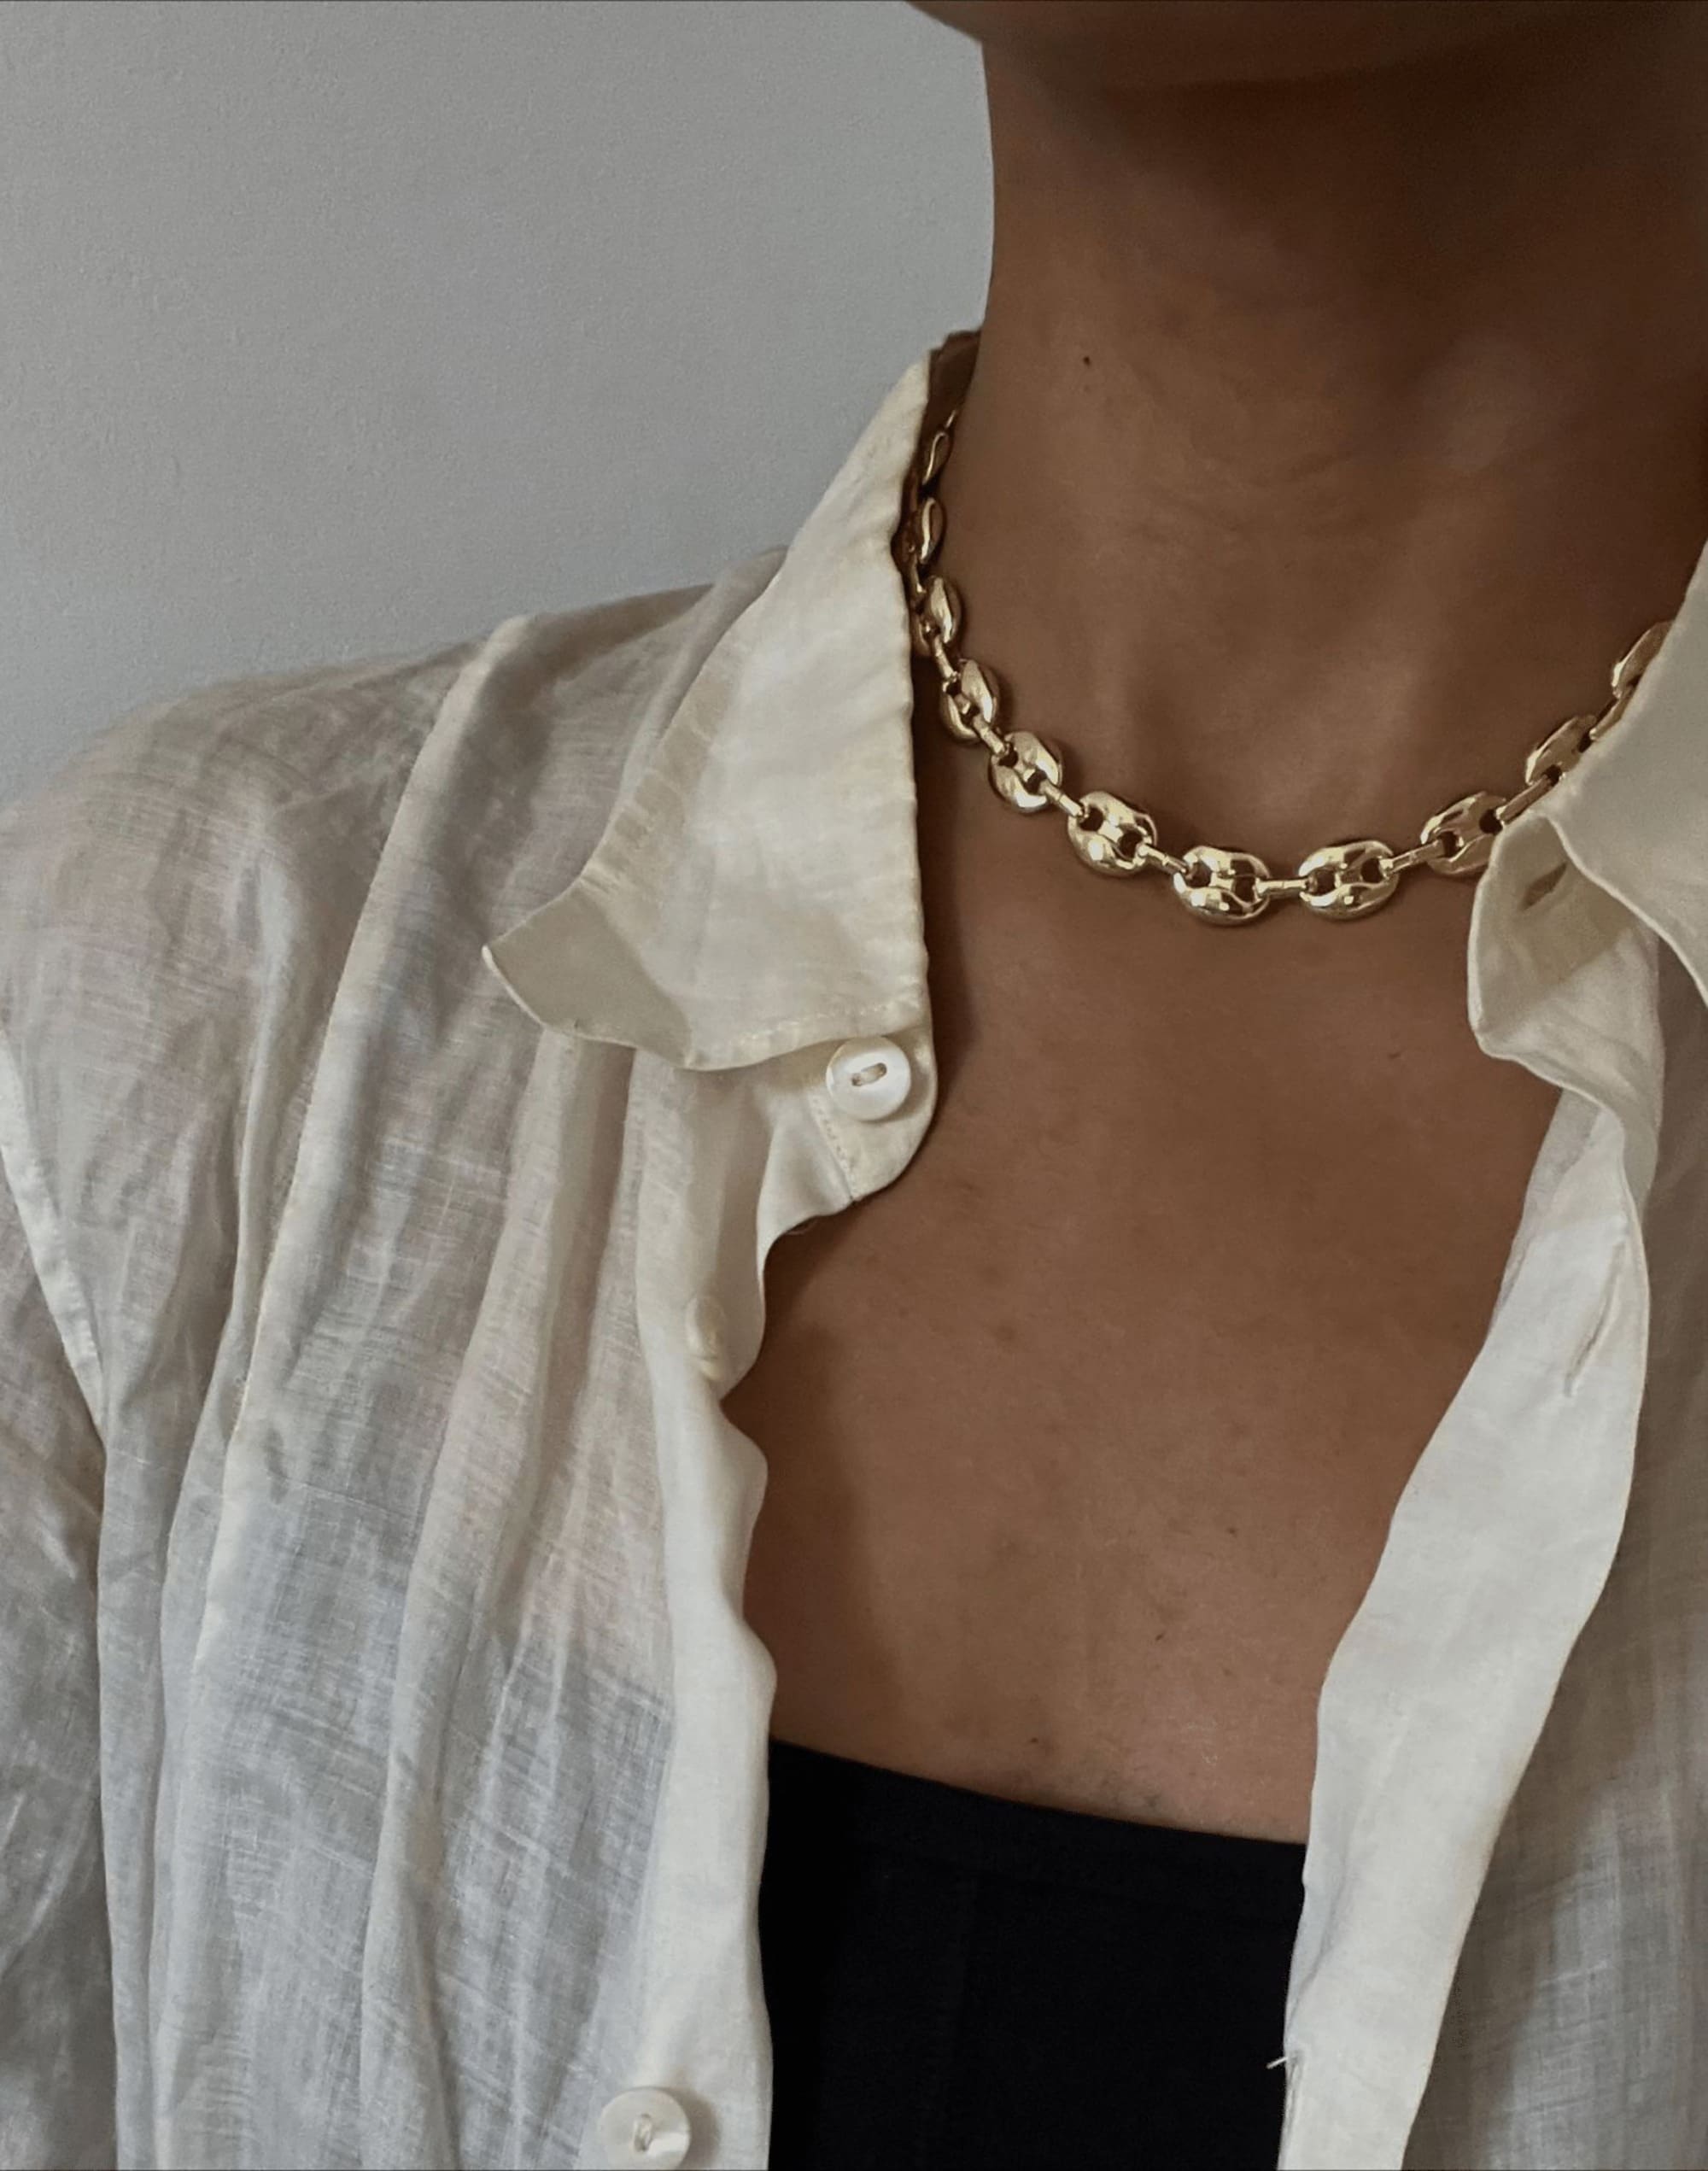 Filosophy Midtown Puffy gucci link style chain